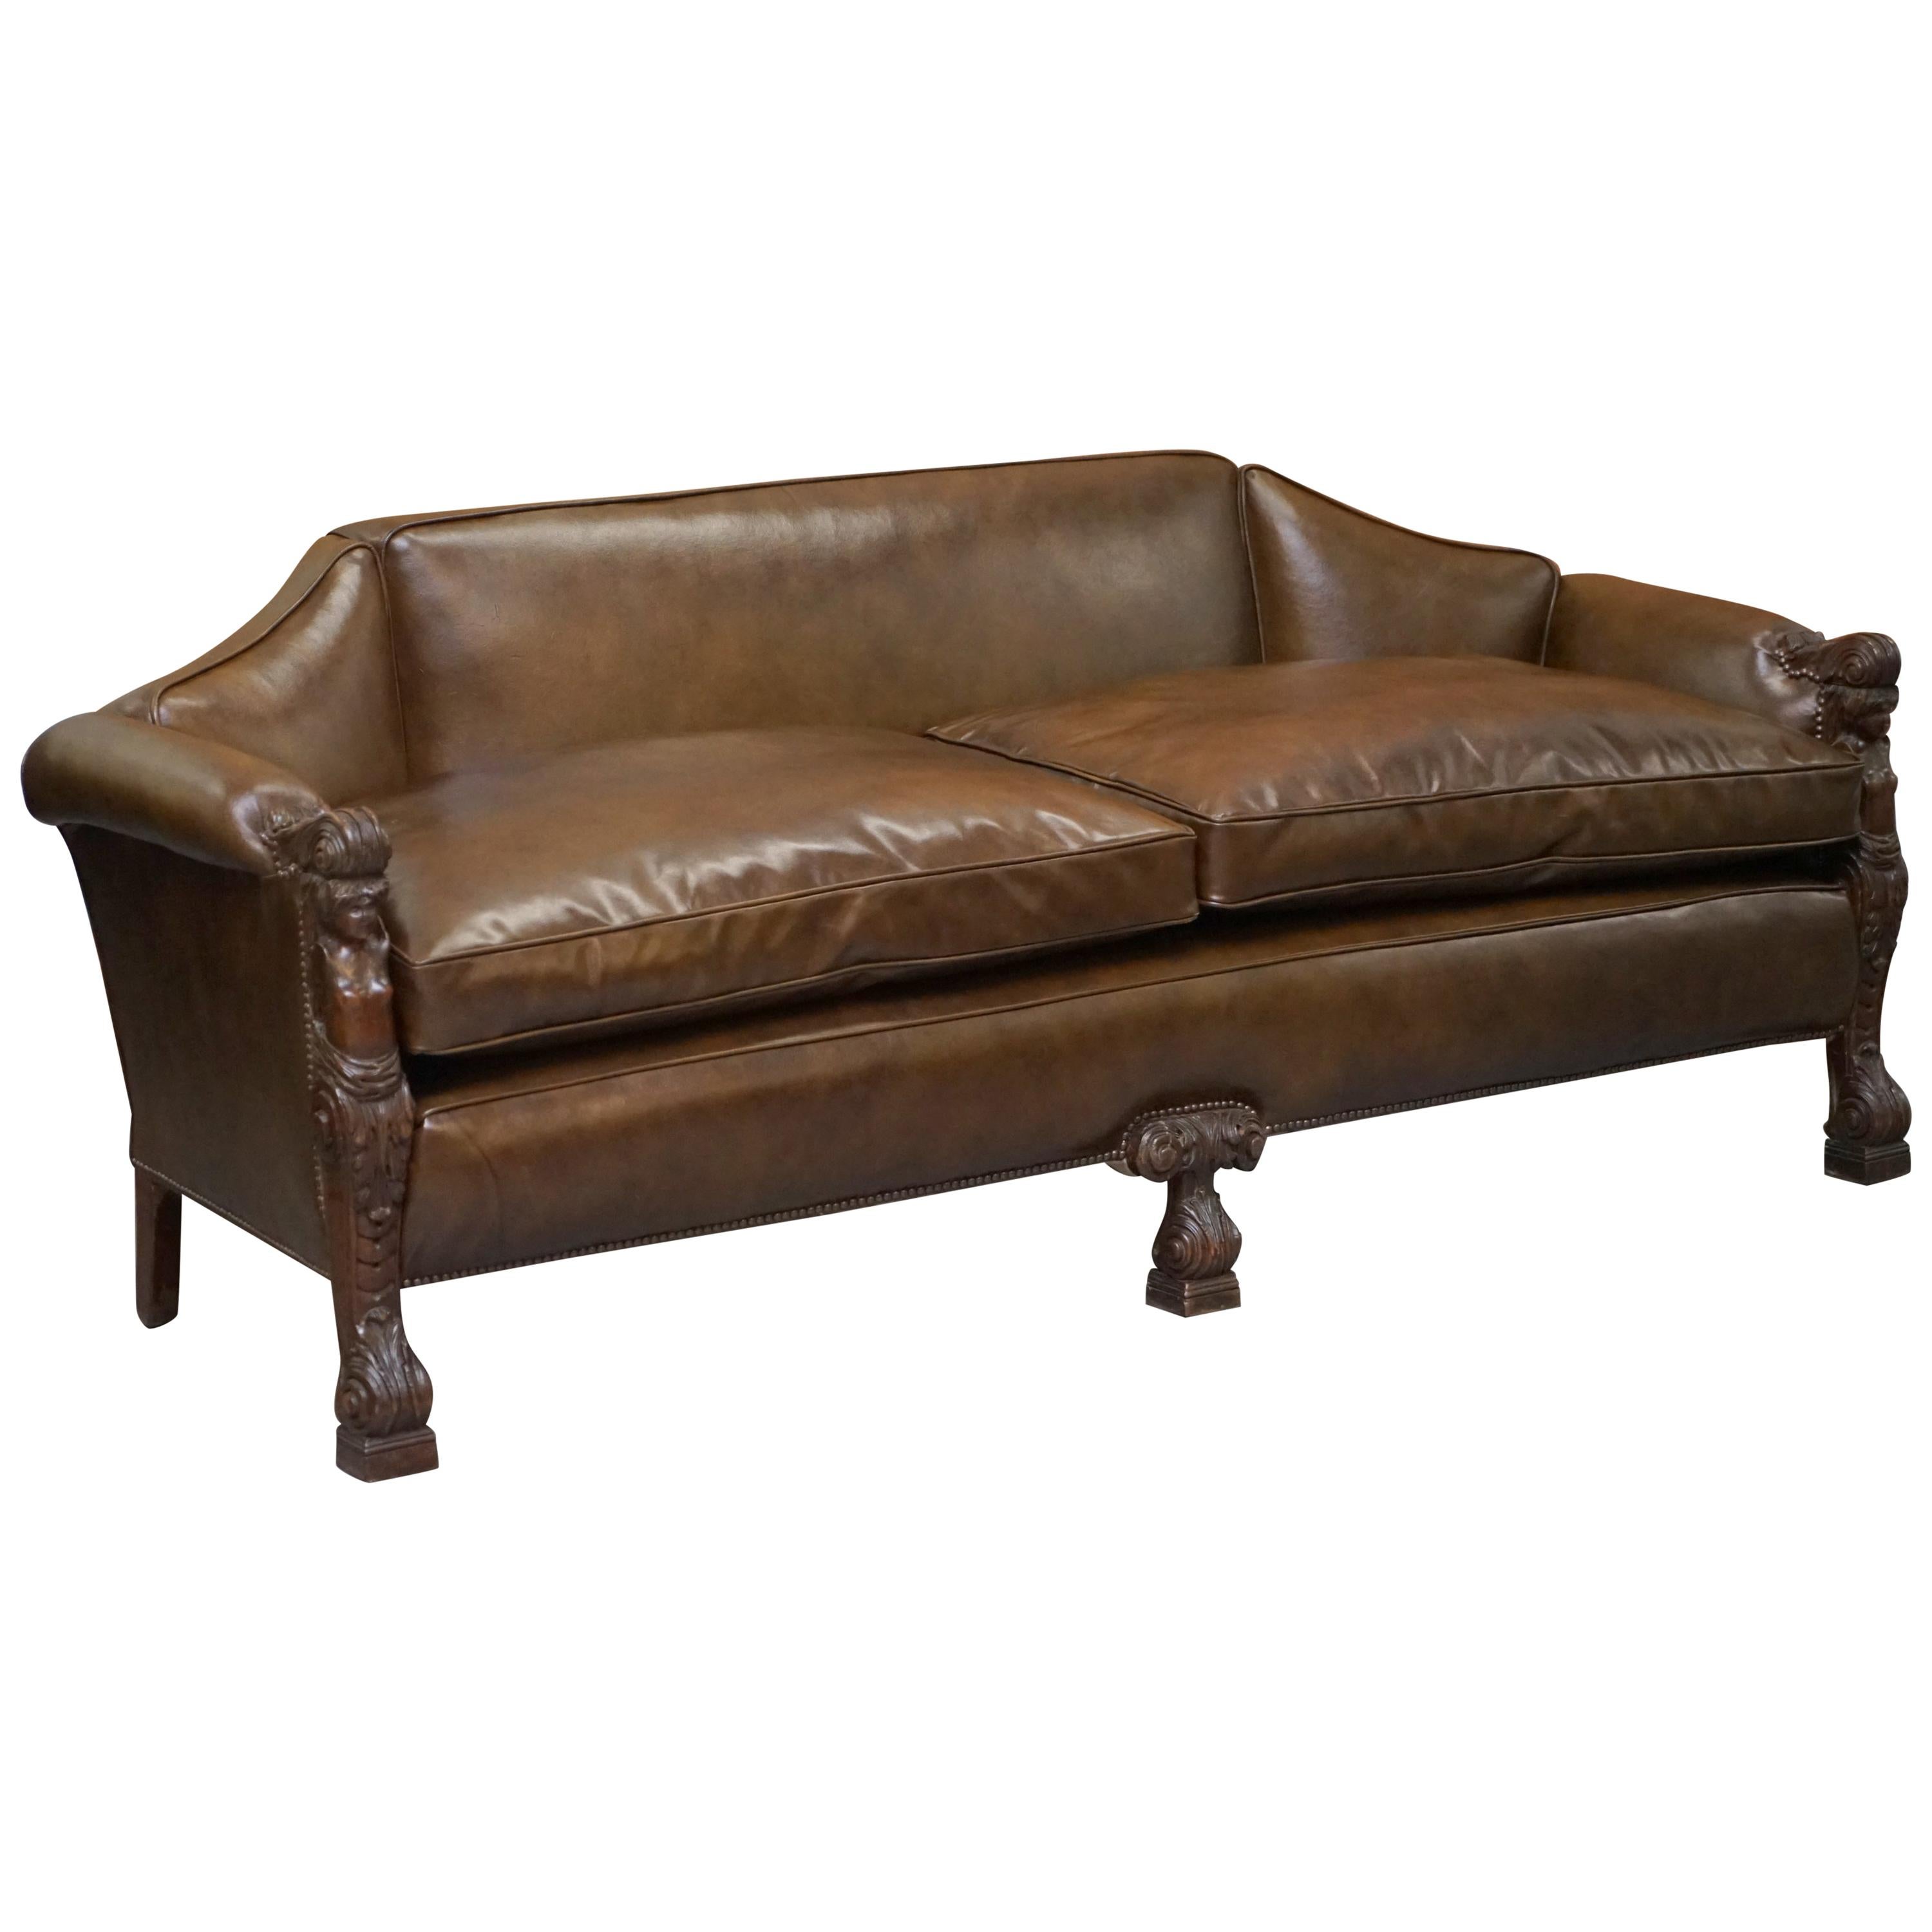 Sublime Fully Restored Regency 1810 Sofa Brown Leather Carved Herms Statue Frame For Sale